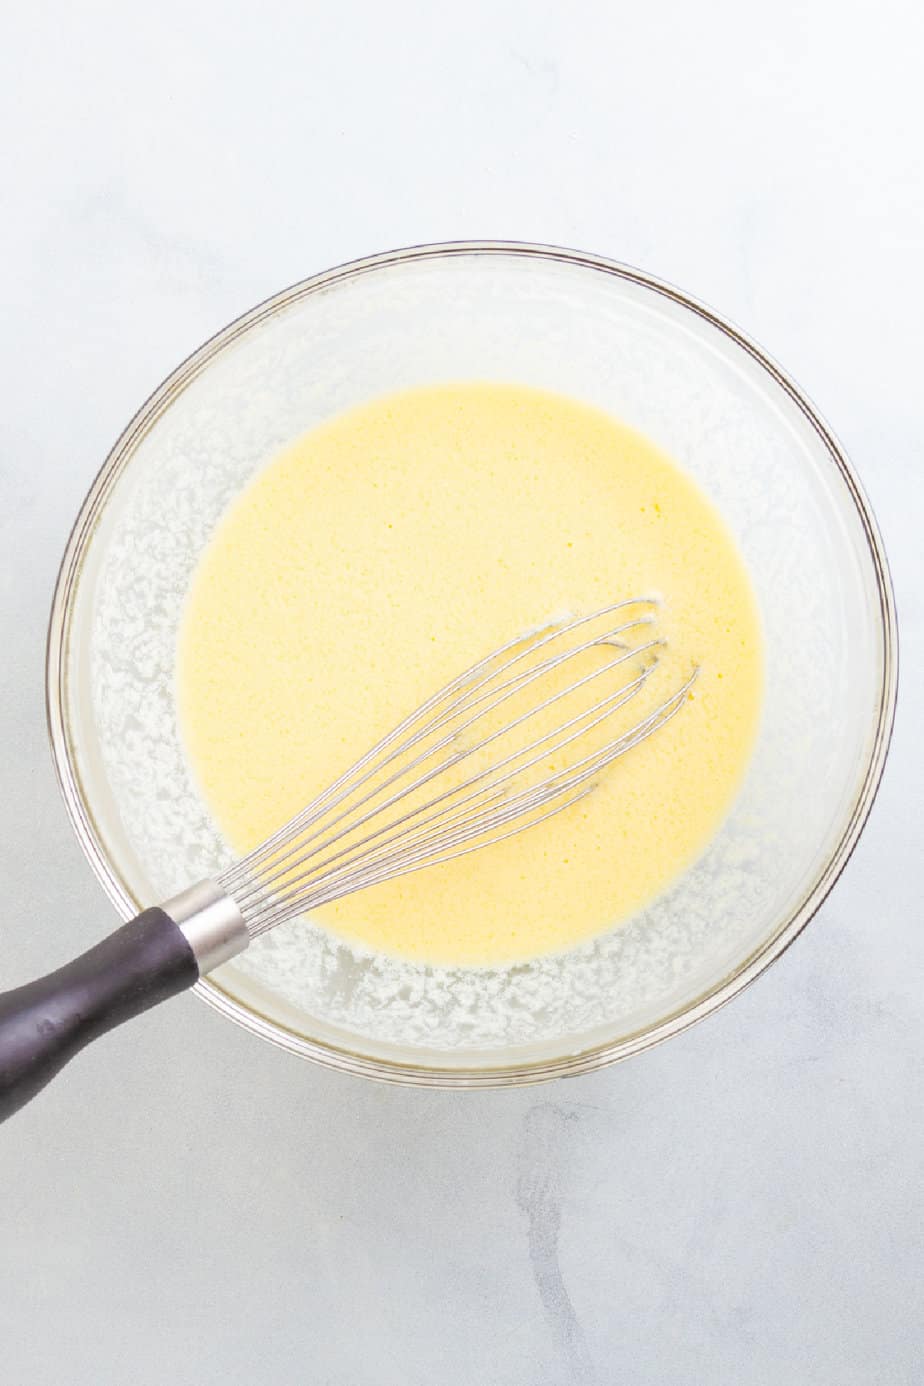 Wet ingredients in a bowl on a counter from overhead being mixed with a whisk.